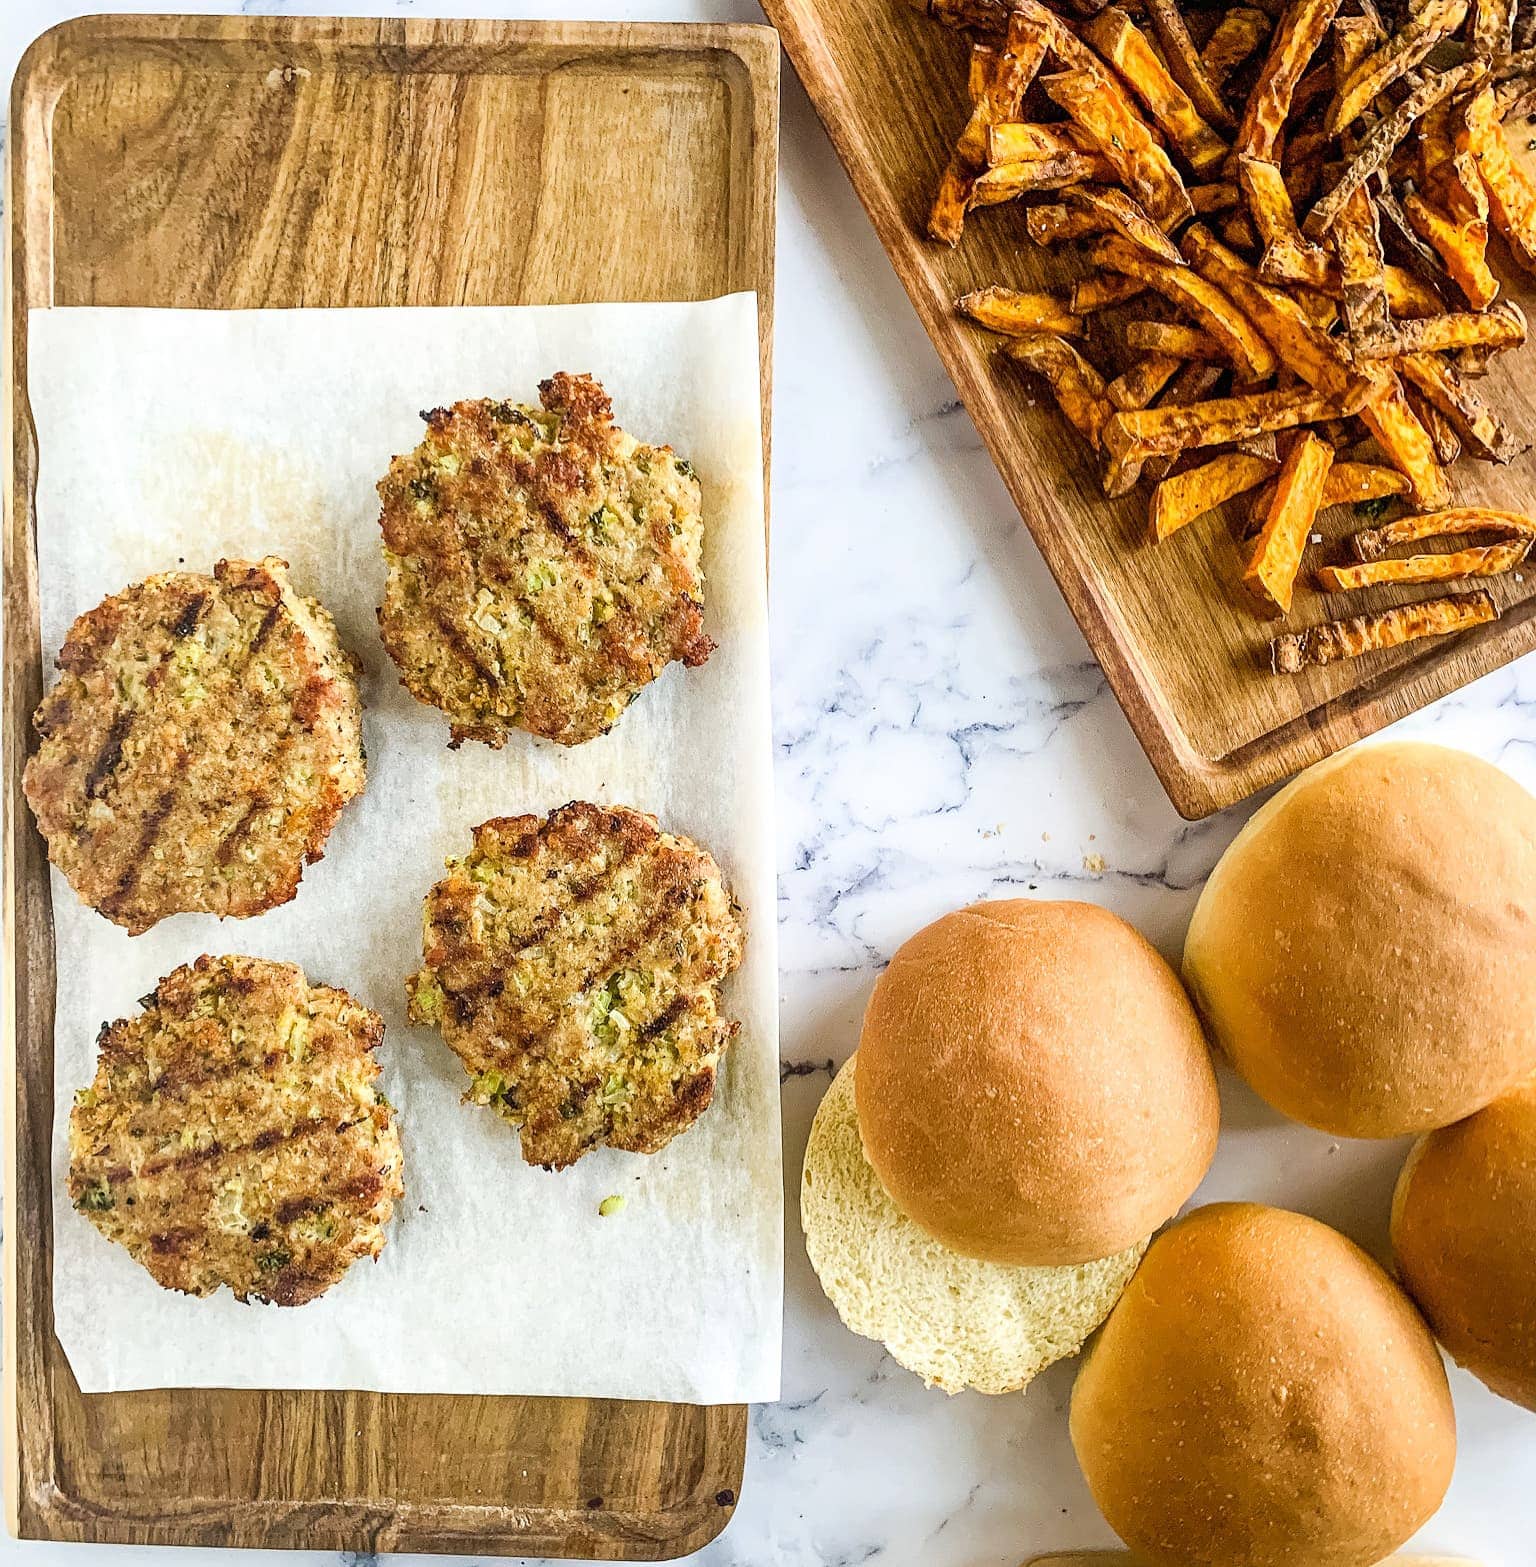 grilled turkey burgers with buns and potato fried at the side.